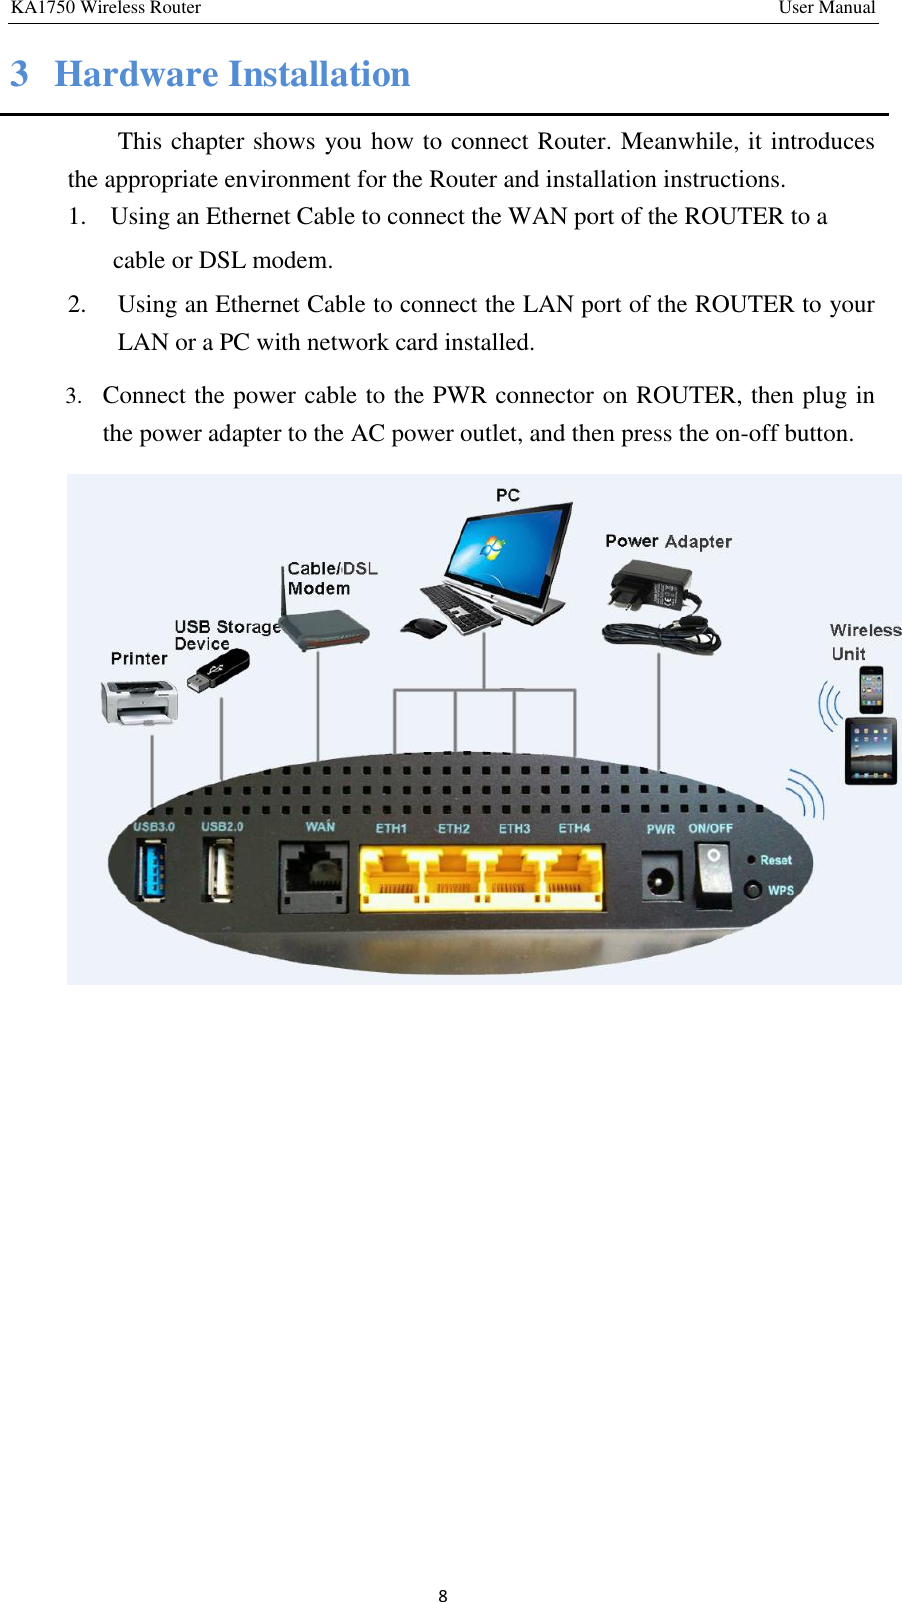 KA1750 Wireless Router       User Manual 8 3  Hardware Installation This chapter shows you how to connect Router. Meanwhile, it introduces the appropriate environment for the Router and installation instructions.   1.   Using an Ethernet Cable to connect the WAN port of the ROUTER to a   cable or DSL modem.   2.  Using an Ethernet Cable to connect the LAN port of the ROUTER to your LAN or a PC with network card installed. 3. Connect the power cable to the PWR connector on ROUTER, then plug in the power adapter to the AC power outlet, and then press the on-off button.          